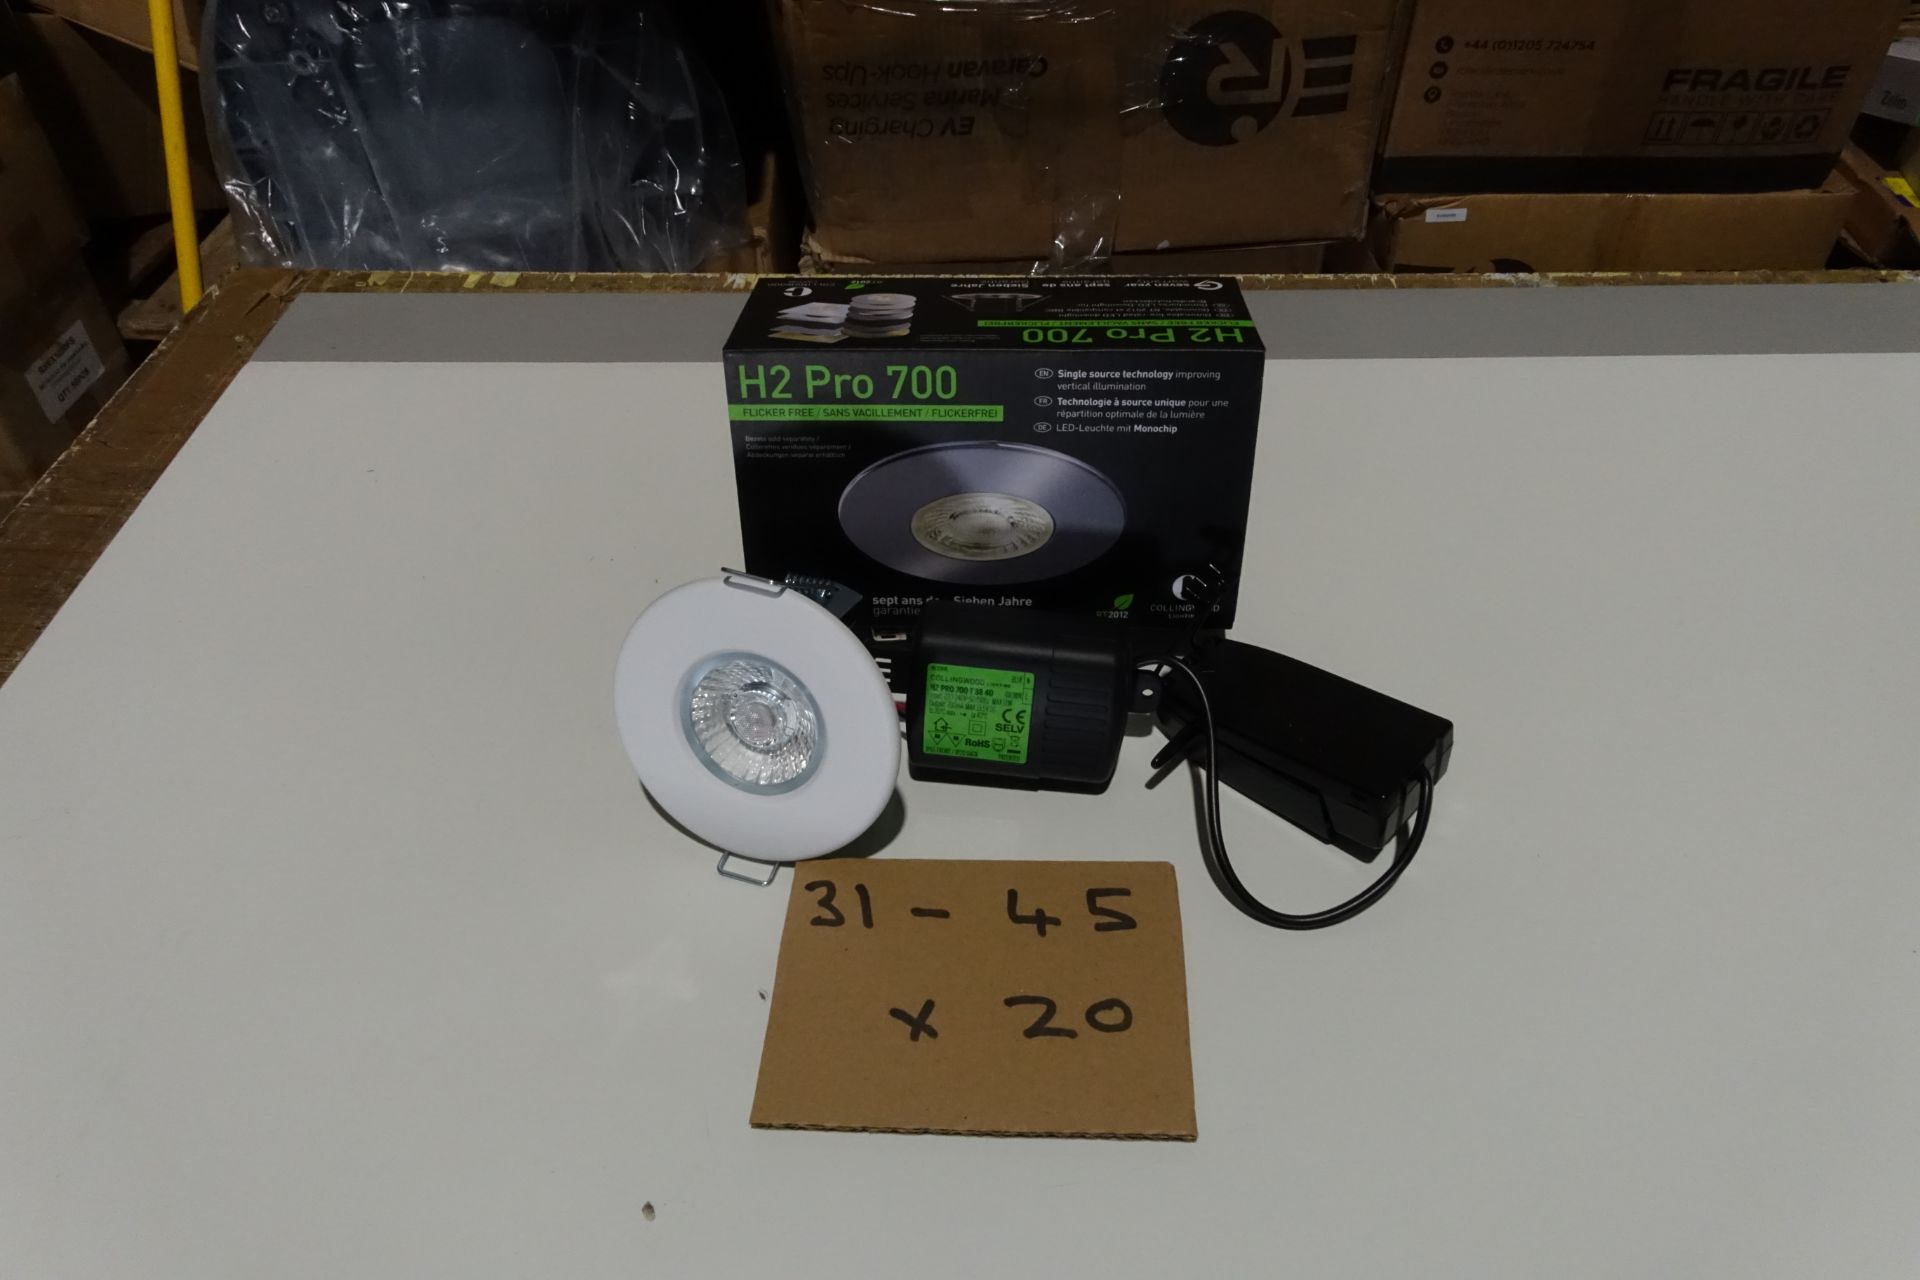 20 x COLLINGWOOD AF1623QD 11W LED H2 Pro 700 Downlights IP65 Dimmable Fire Rated 2700K C/W Matt